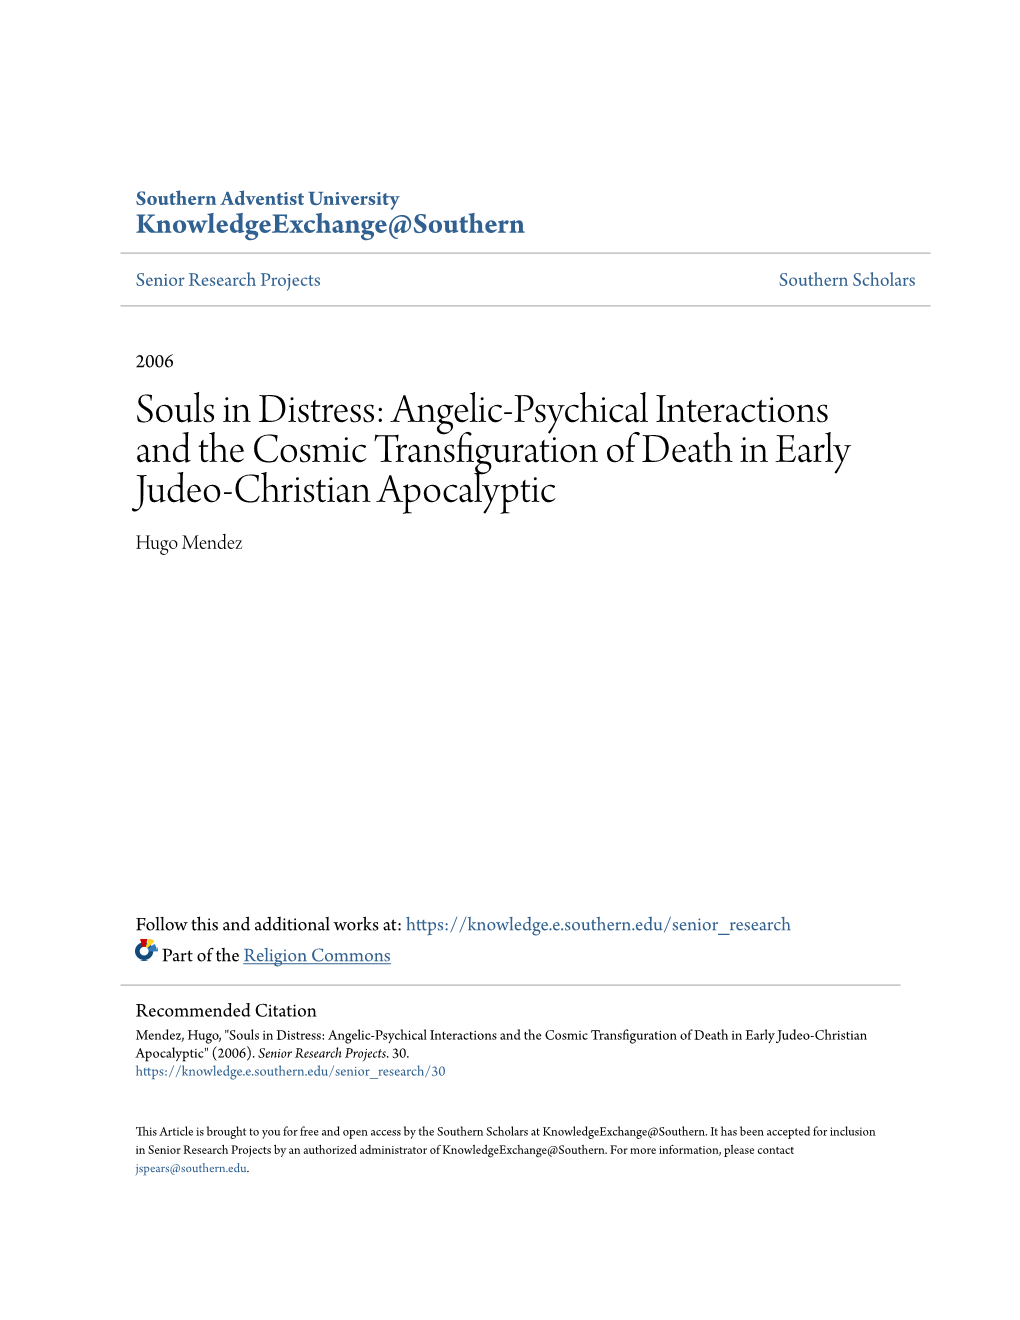 Souls in Distress: Angelic-Psychical Interactions and the Cosmic Transfiguration of Death in Early Judeo-Christian Apocalyptic Hugo Mendez